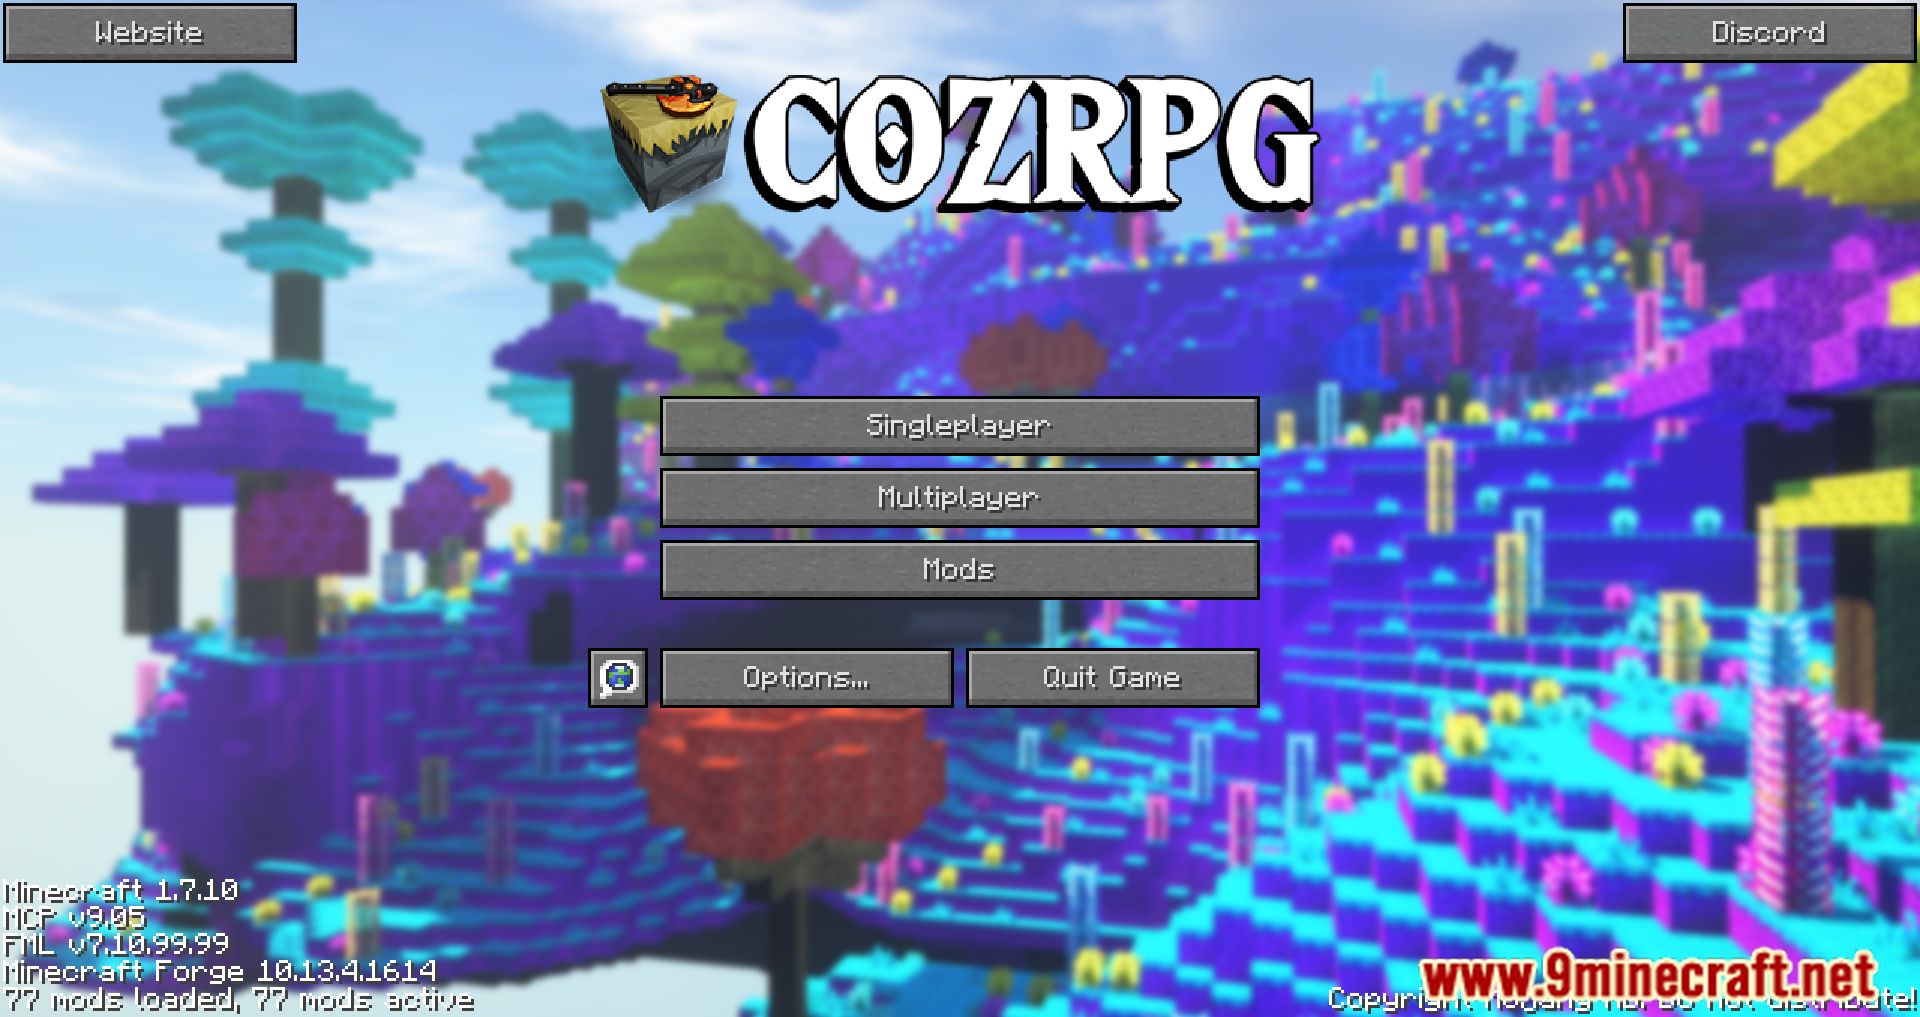 CozRPG Evolved Modpack (1.7.10) - A Modpack That Emphasizes Magic And Adventure 2